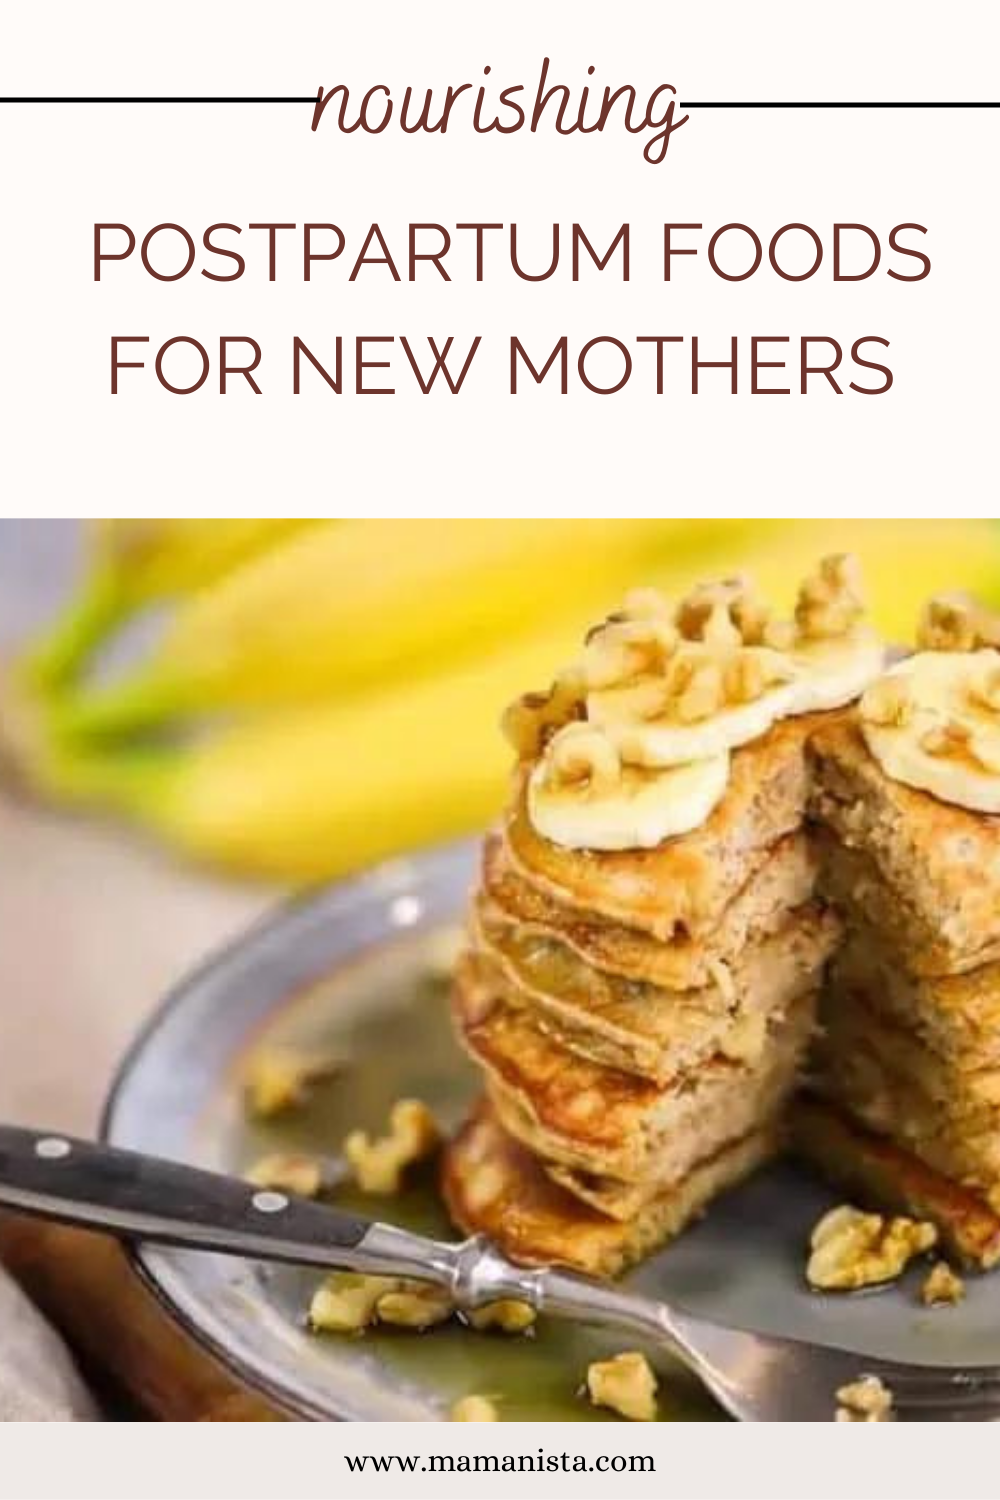 The Best Meals for New Moms for Postpartum Recovery — Aubergine & Olive